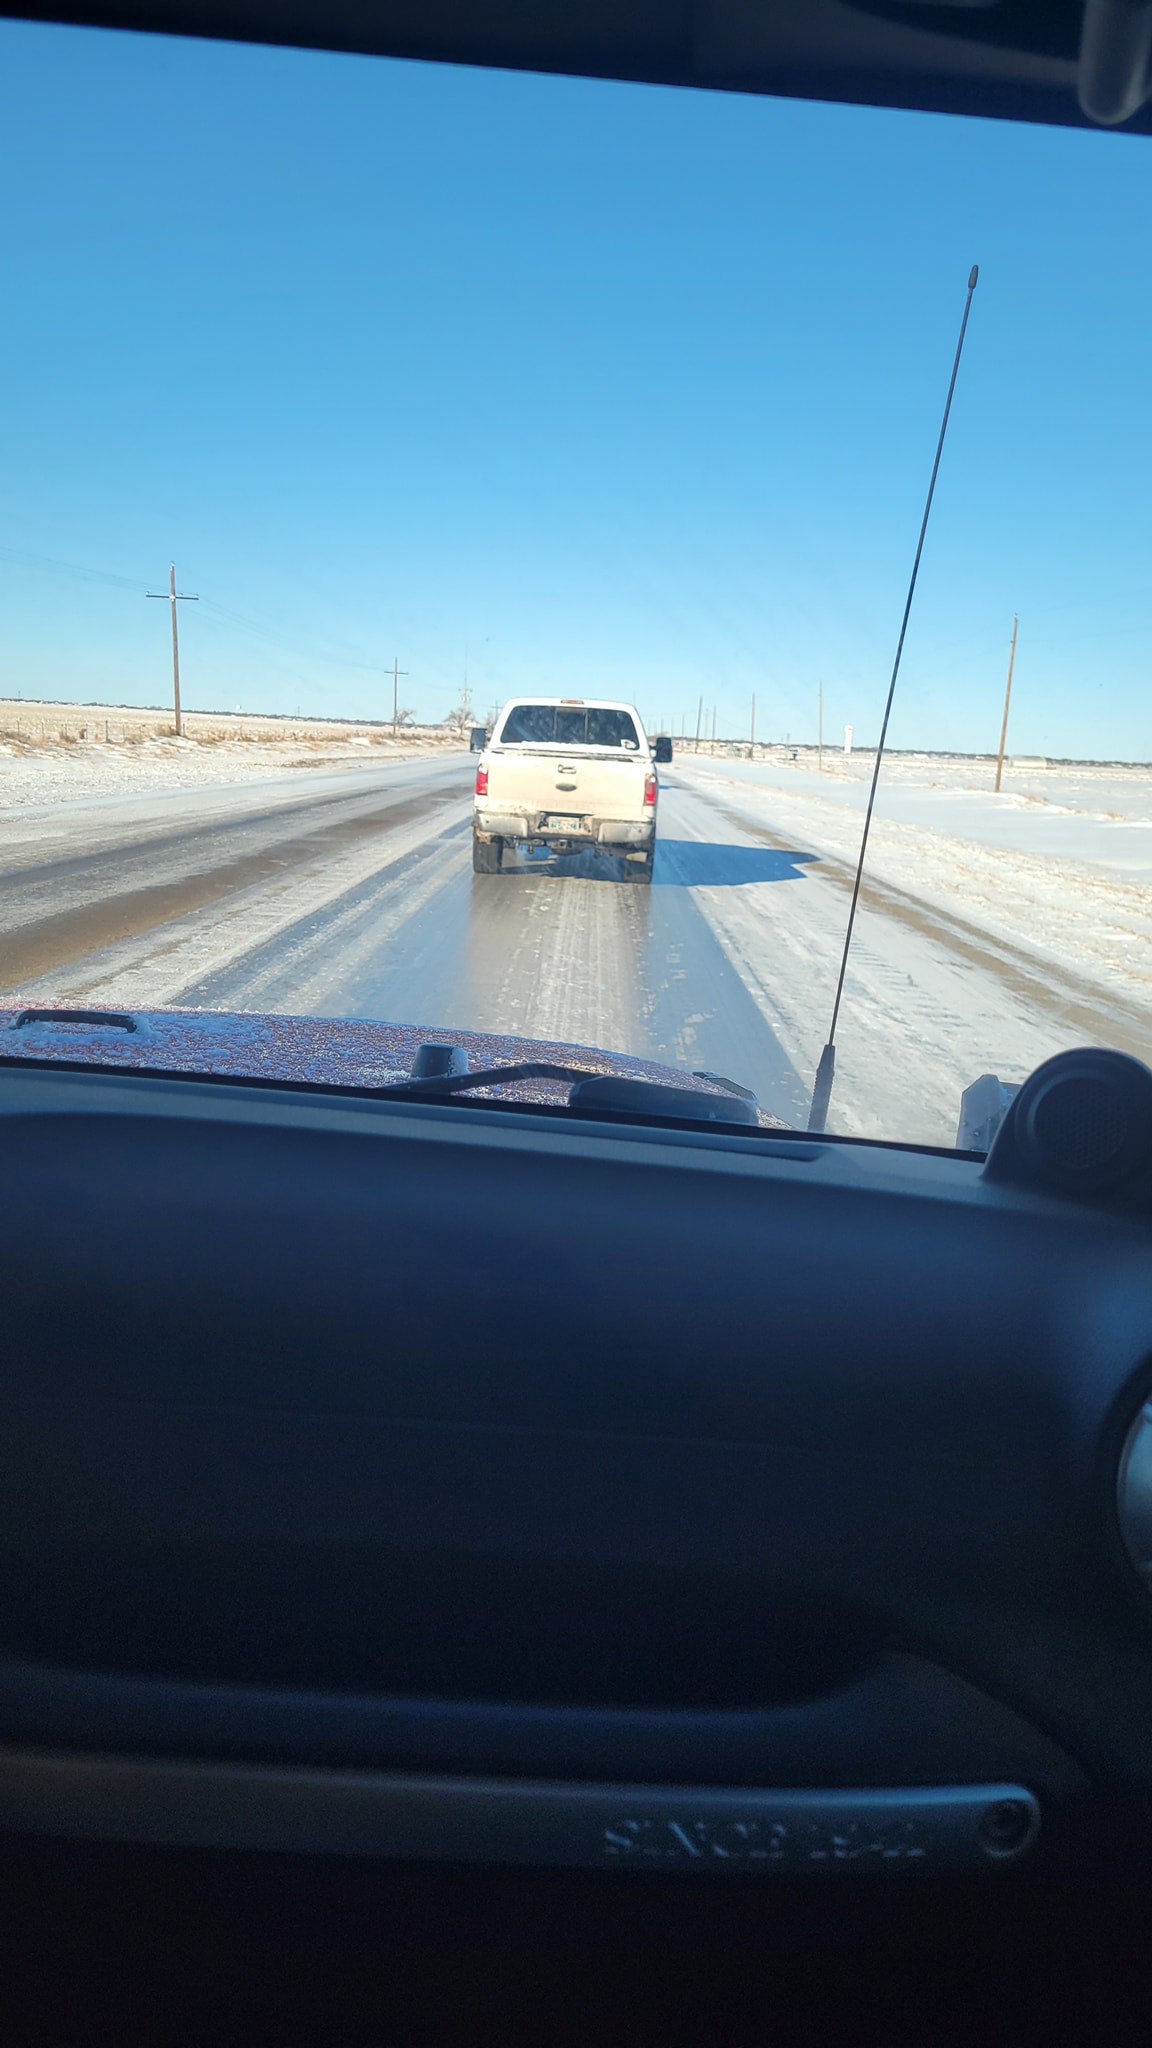 Photo by Meaghan Shipley of an ice covered road between Stinnett and Dumas, Texas the morning after the February 15th, 2023 snow event